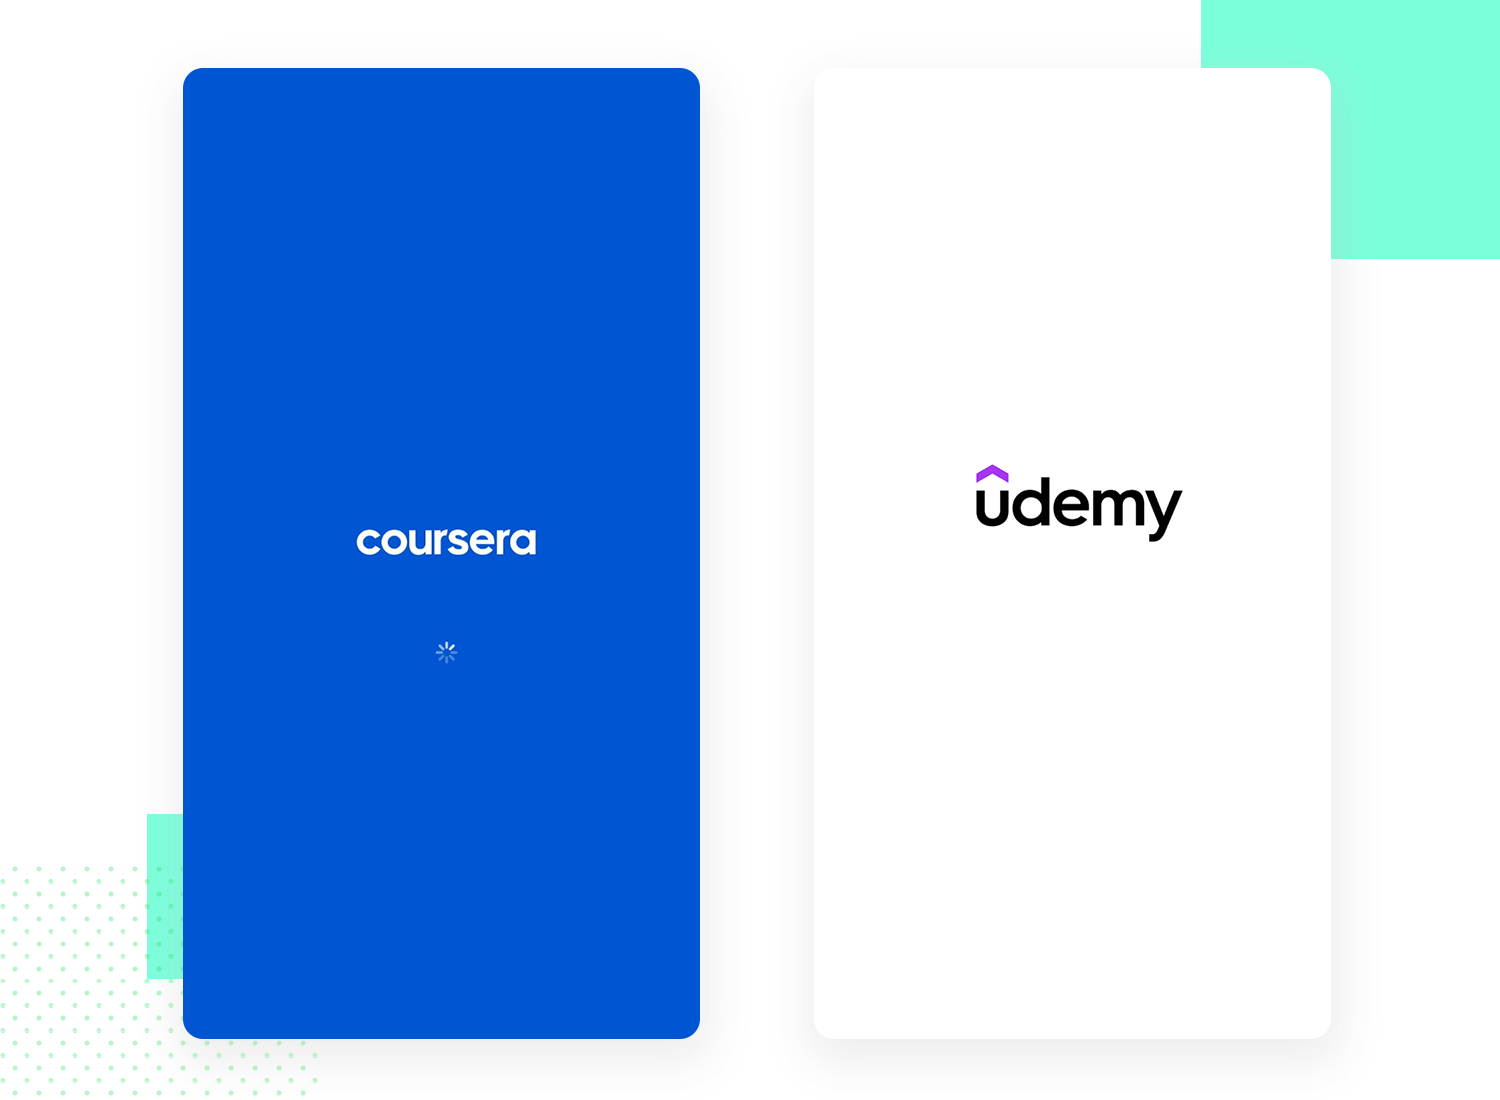 Coursera and Udemy splash screen examples